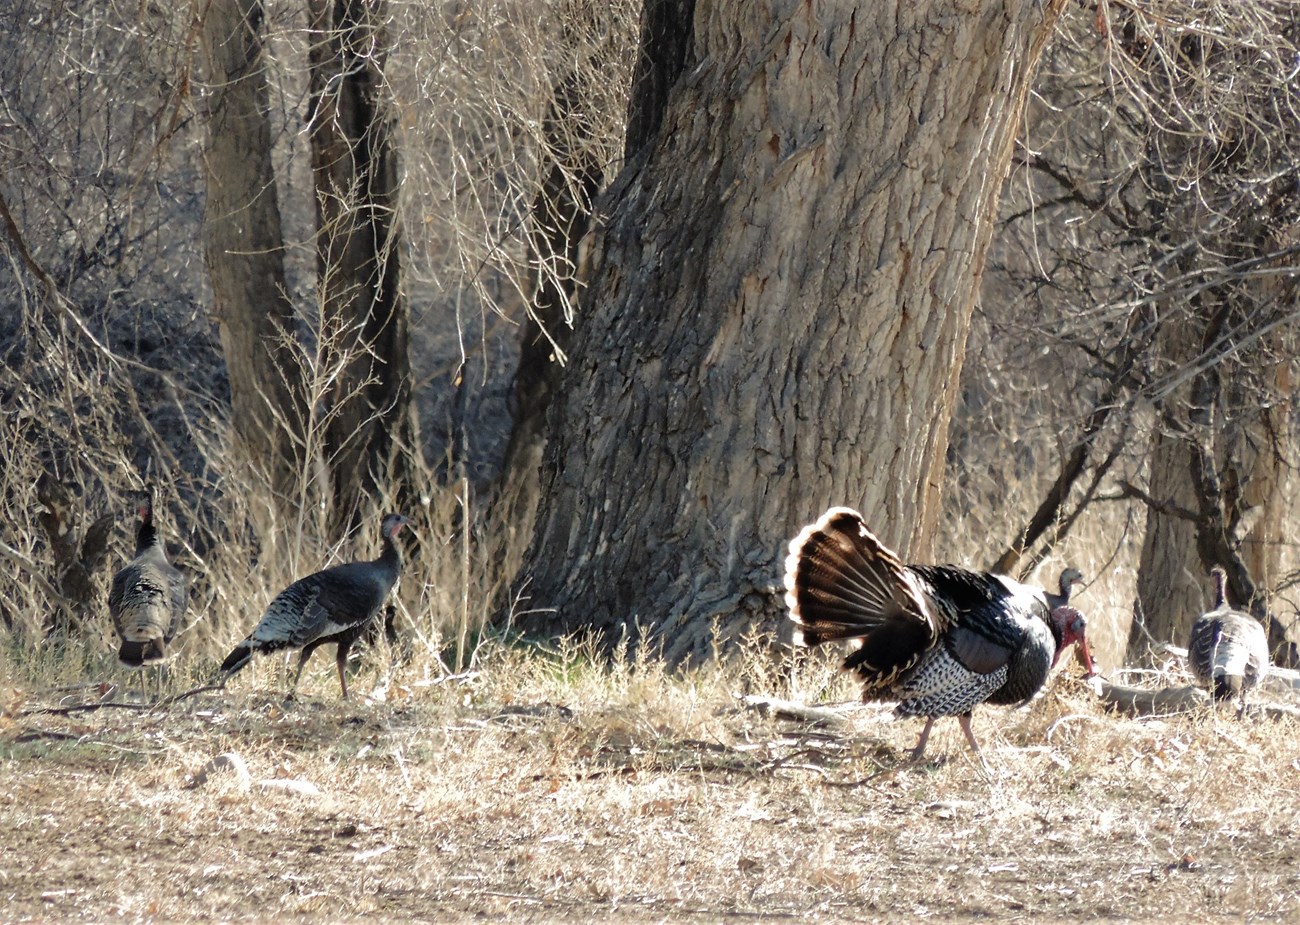 A flock of turkeys, photographed near Aztec Ruins National Monument.